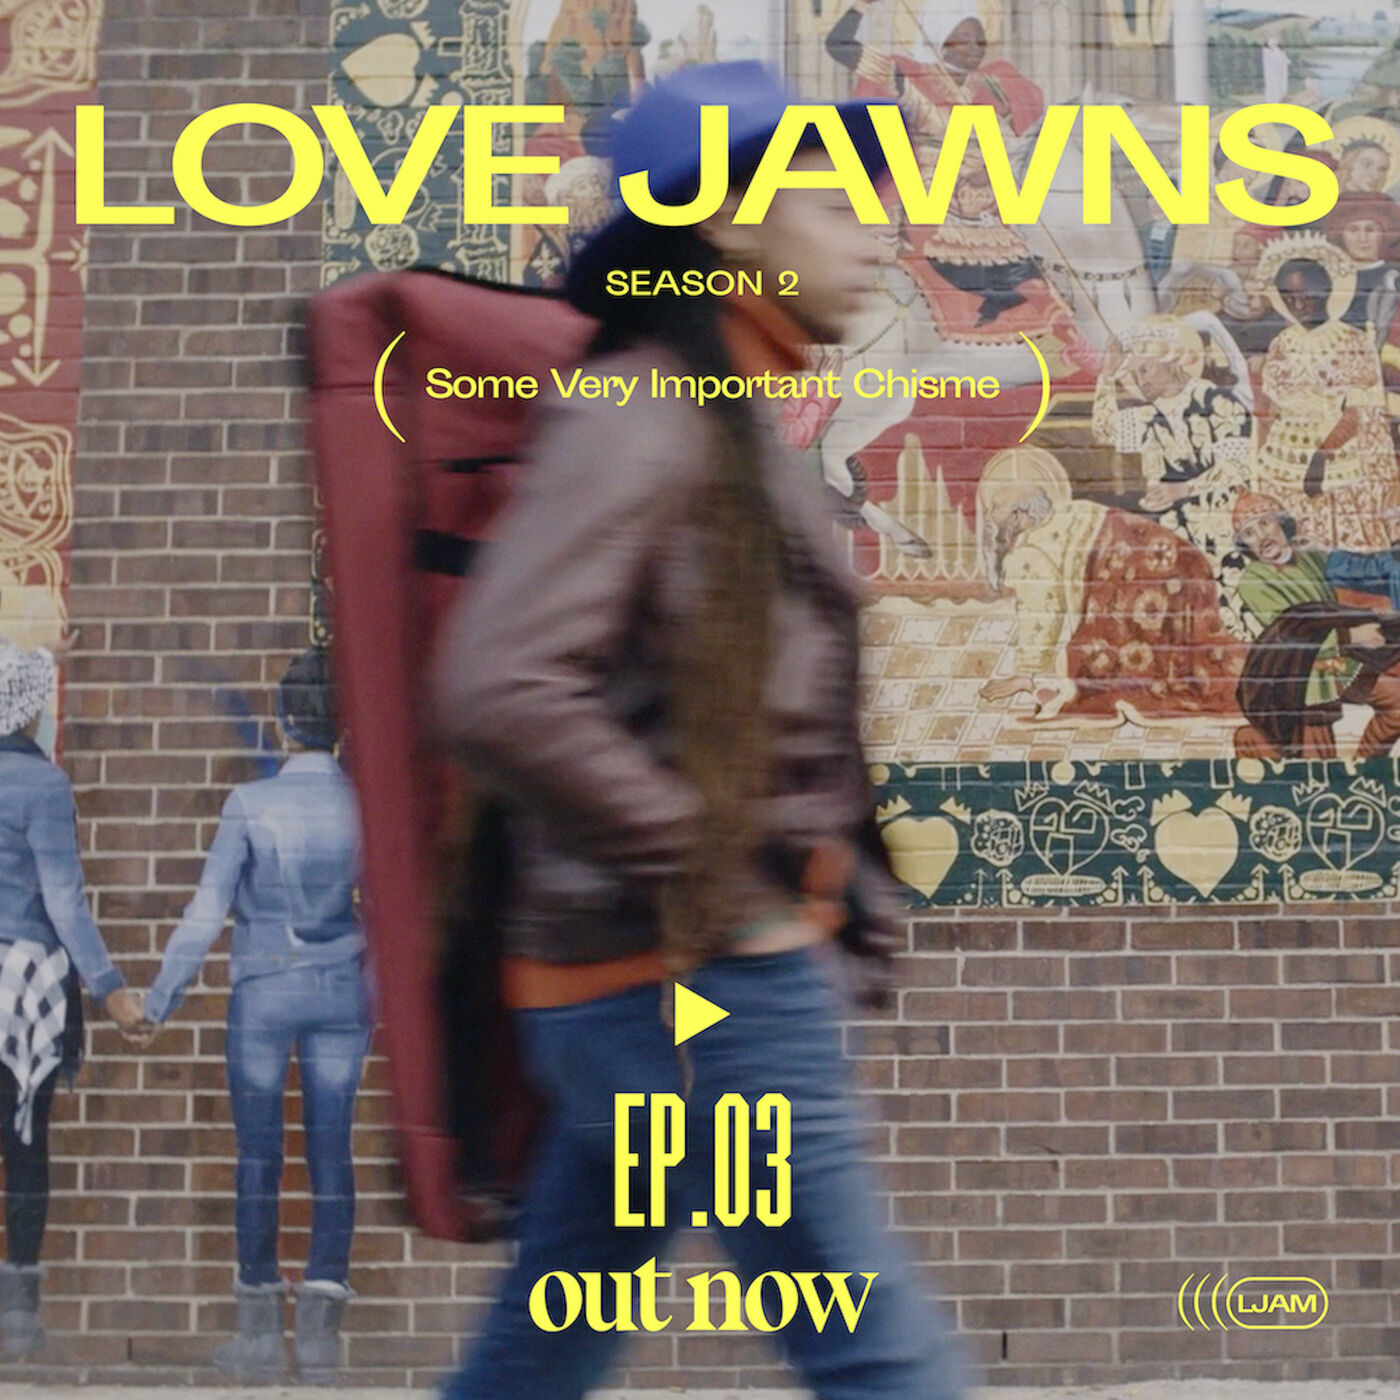 A Love Jawns podcast cover that says "Love Jawns Season 2 Some Very Important Chisme, Ep.03 out now"